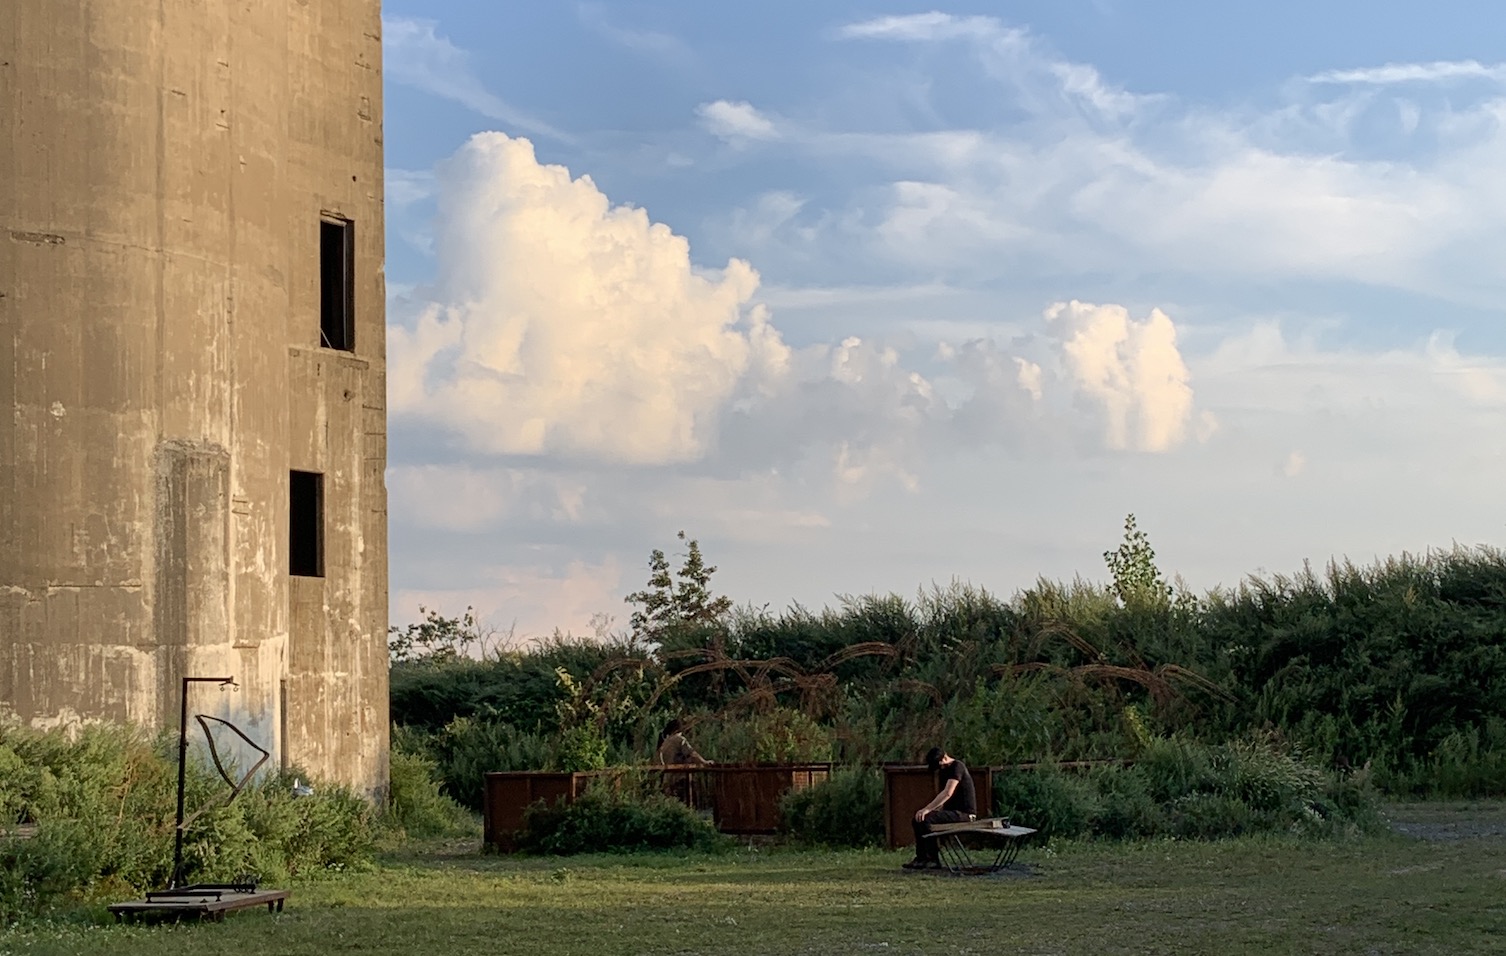 Call for Applications: Workspace Residency, Summer 2023